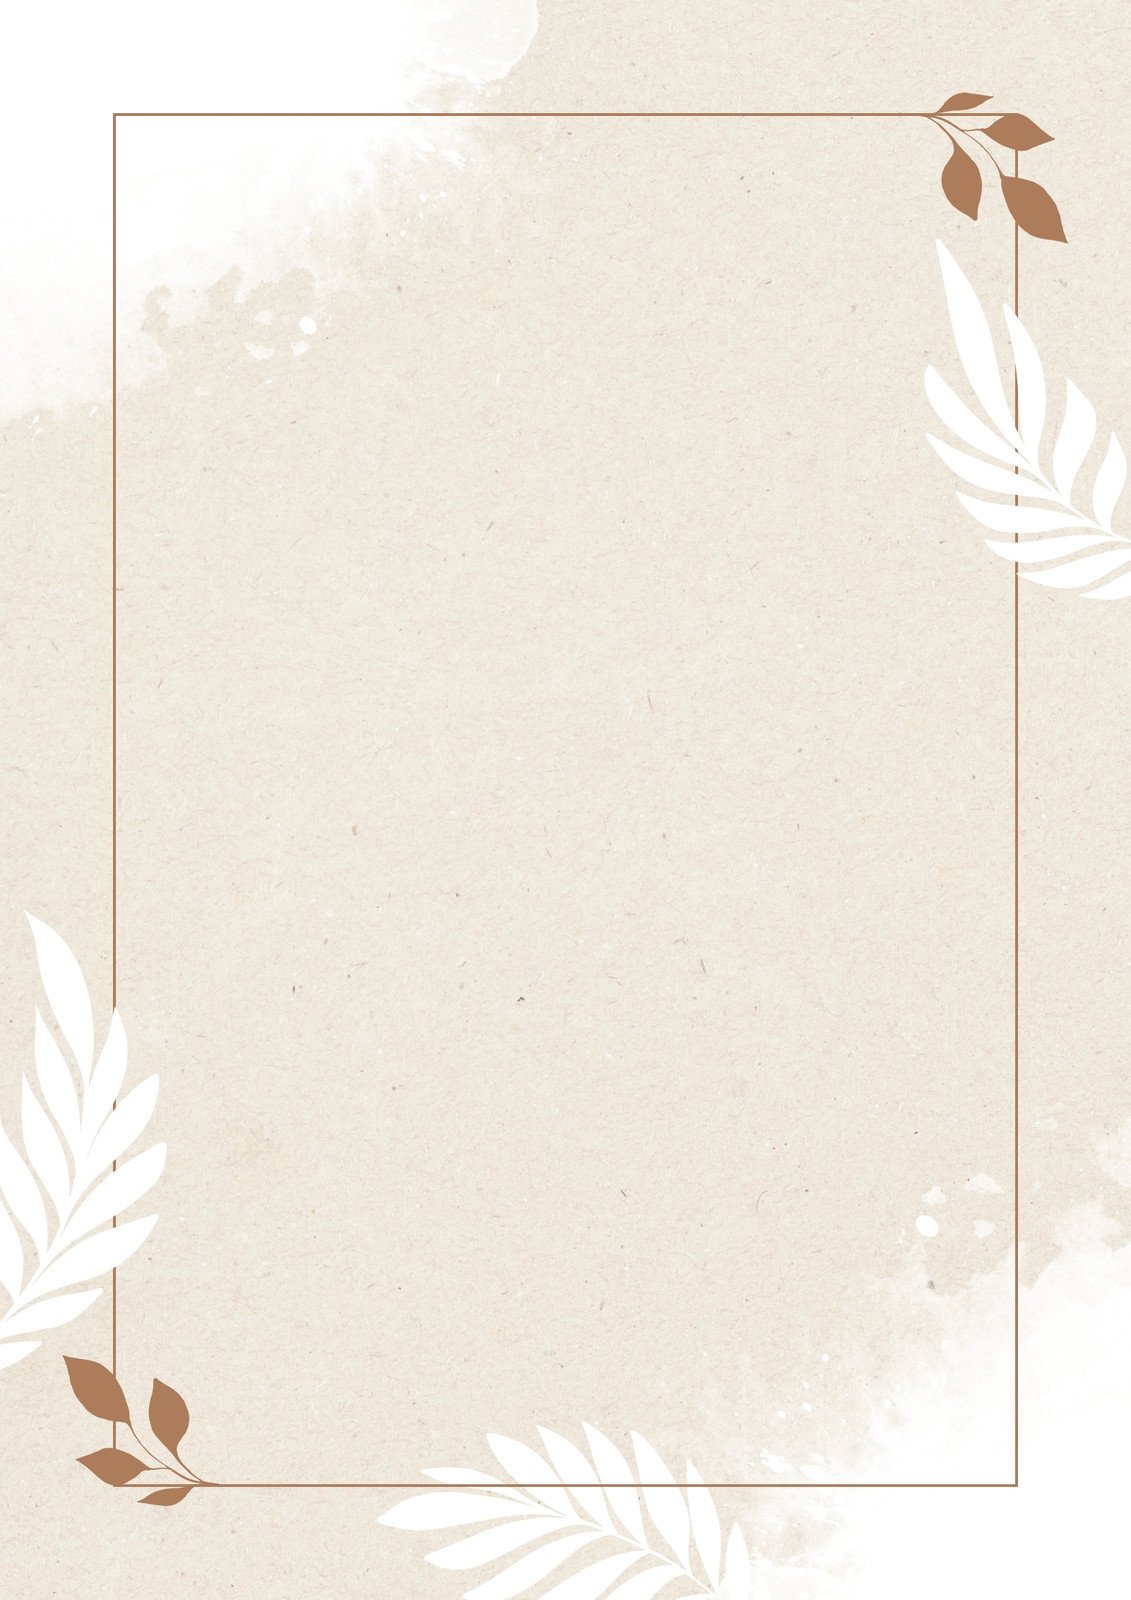 Page 5 - Free printable page border templates you can customize ...